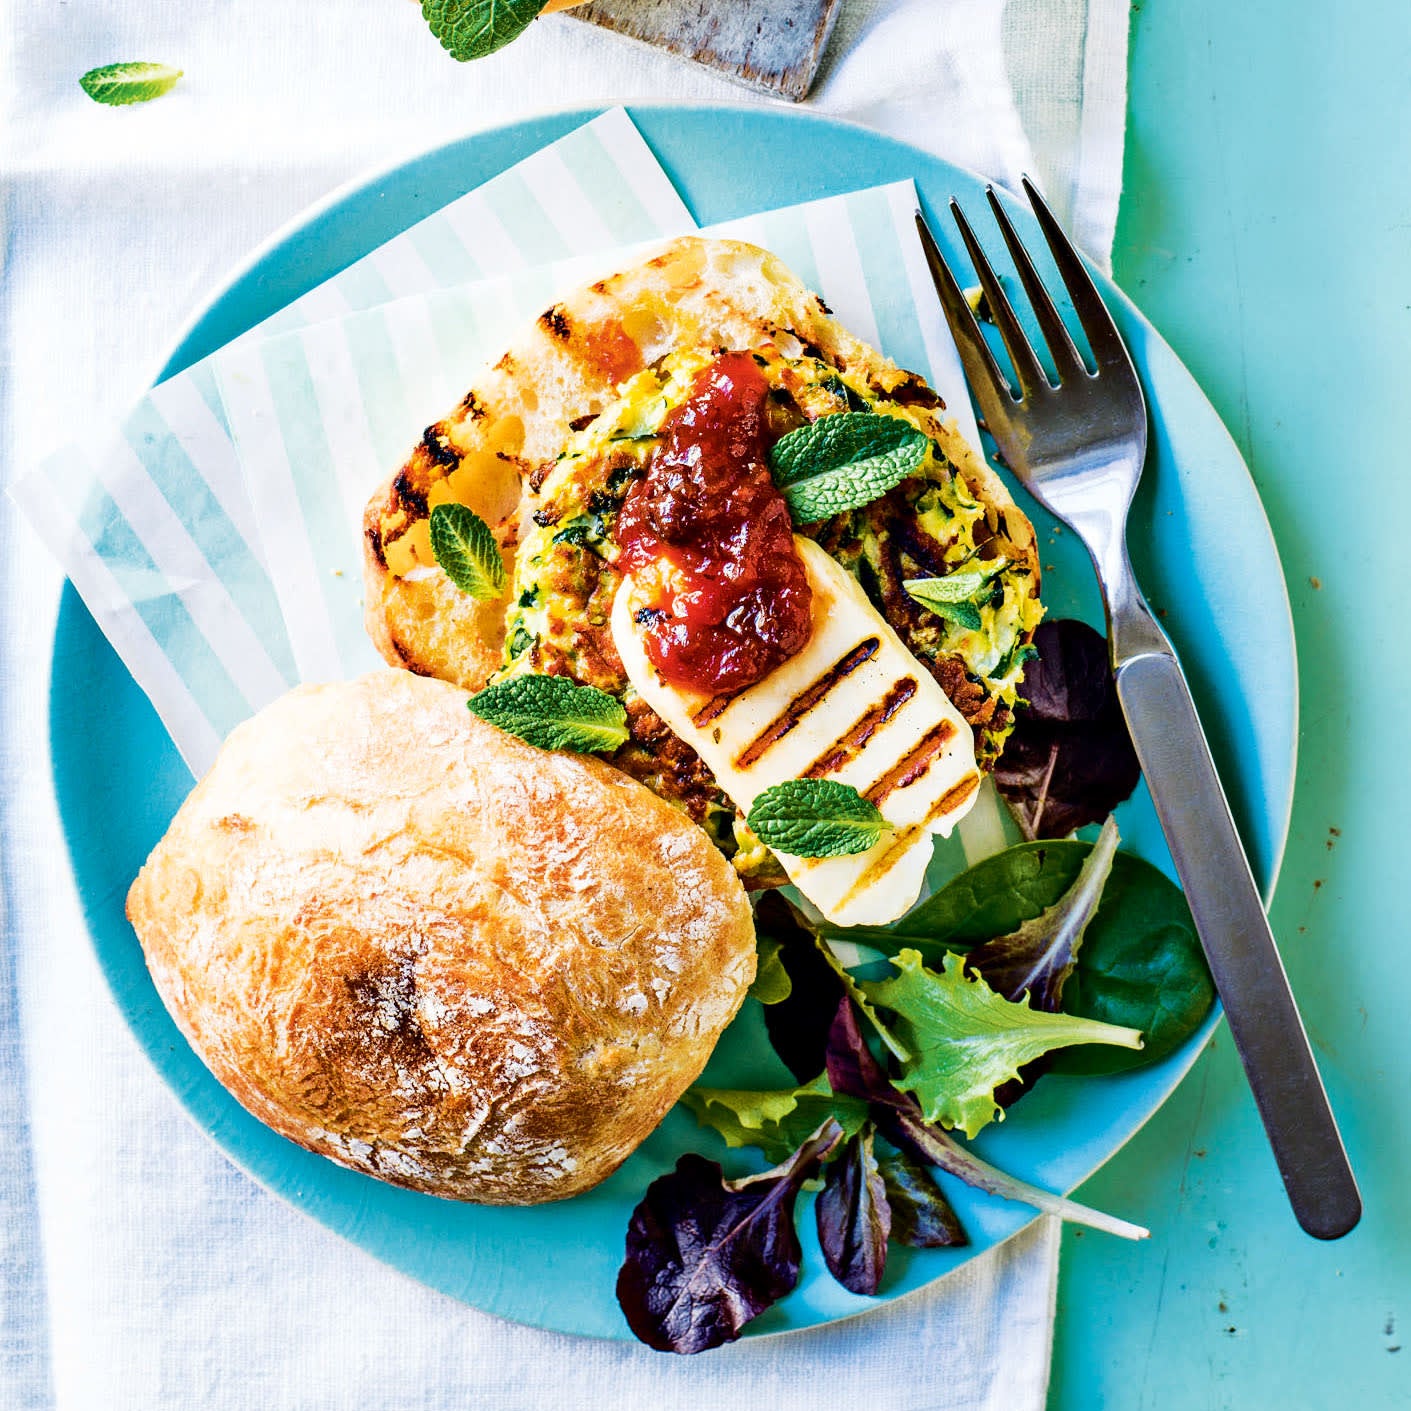 Photo of Courgette & halloumi burger by WW